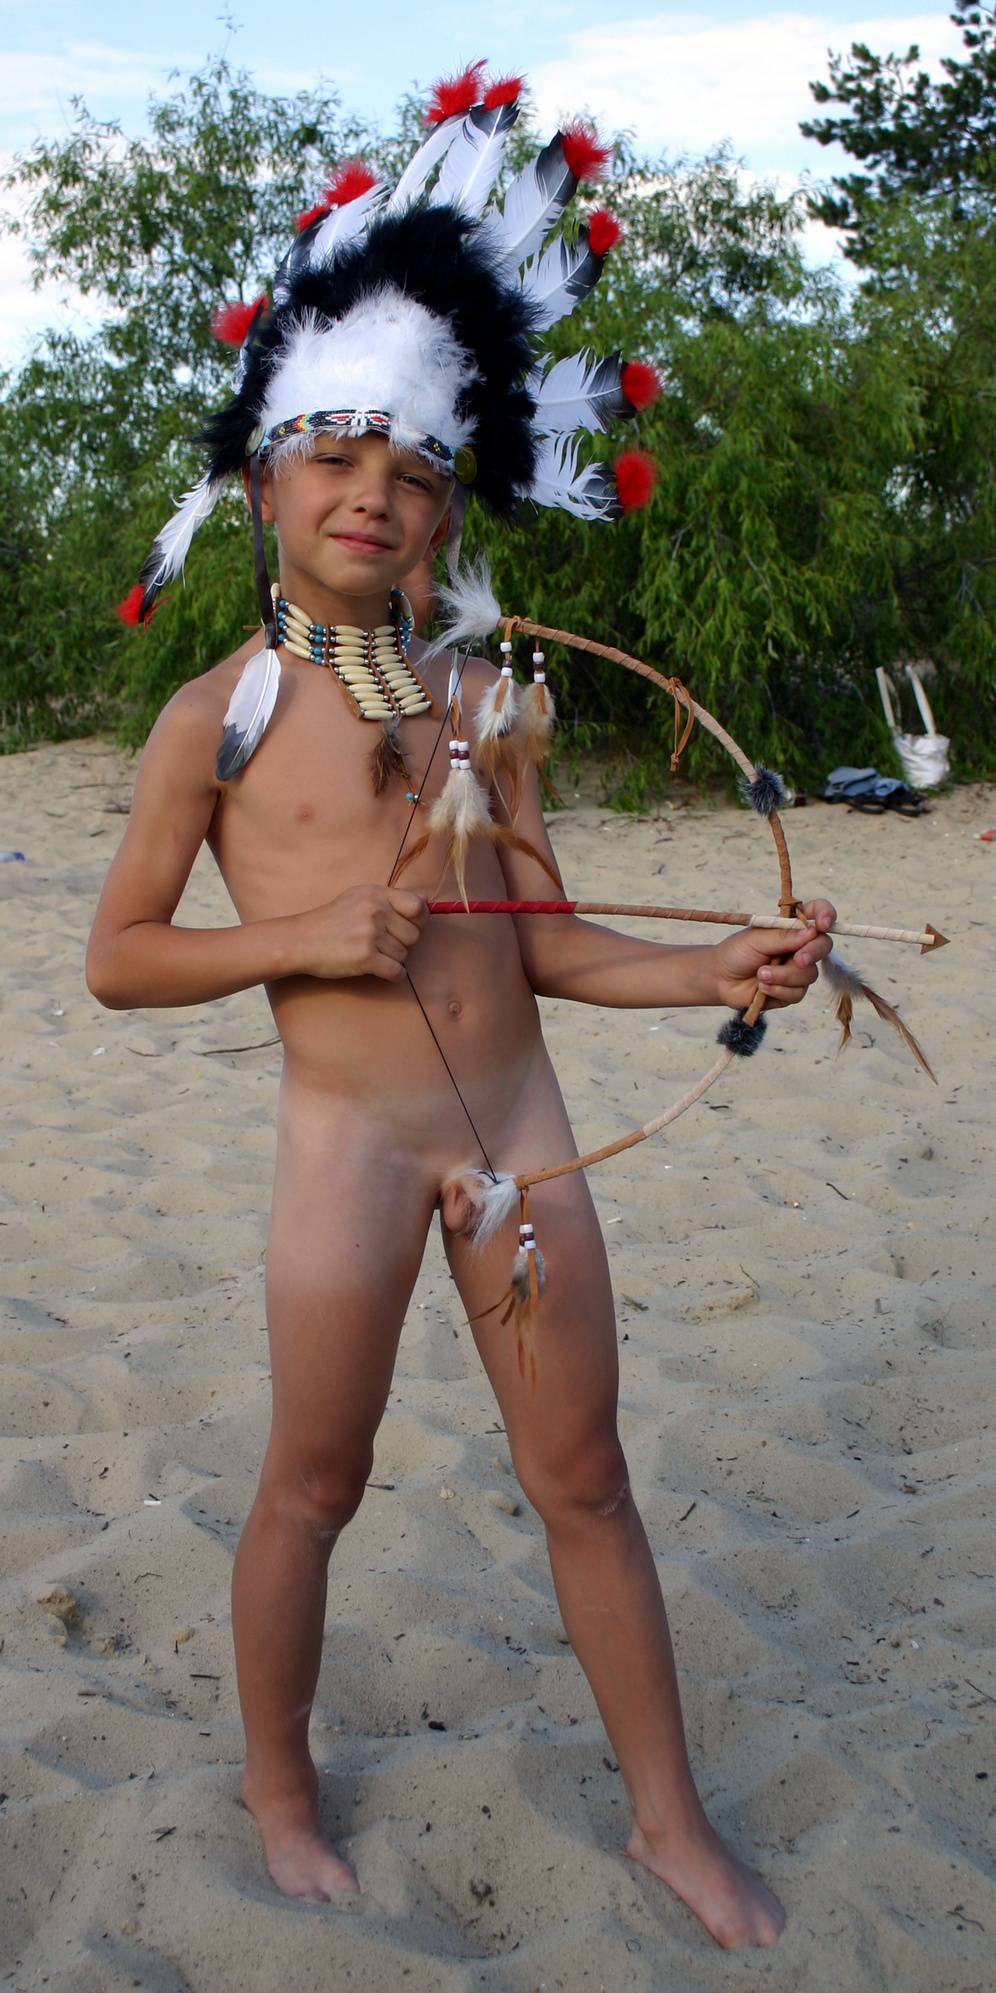 Weapons of Nude Indians - 2